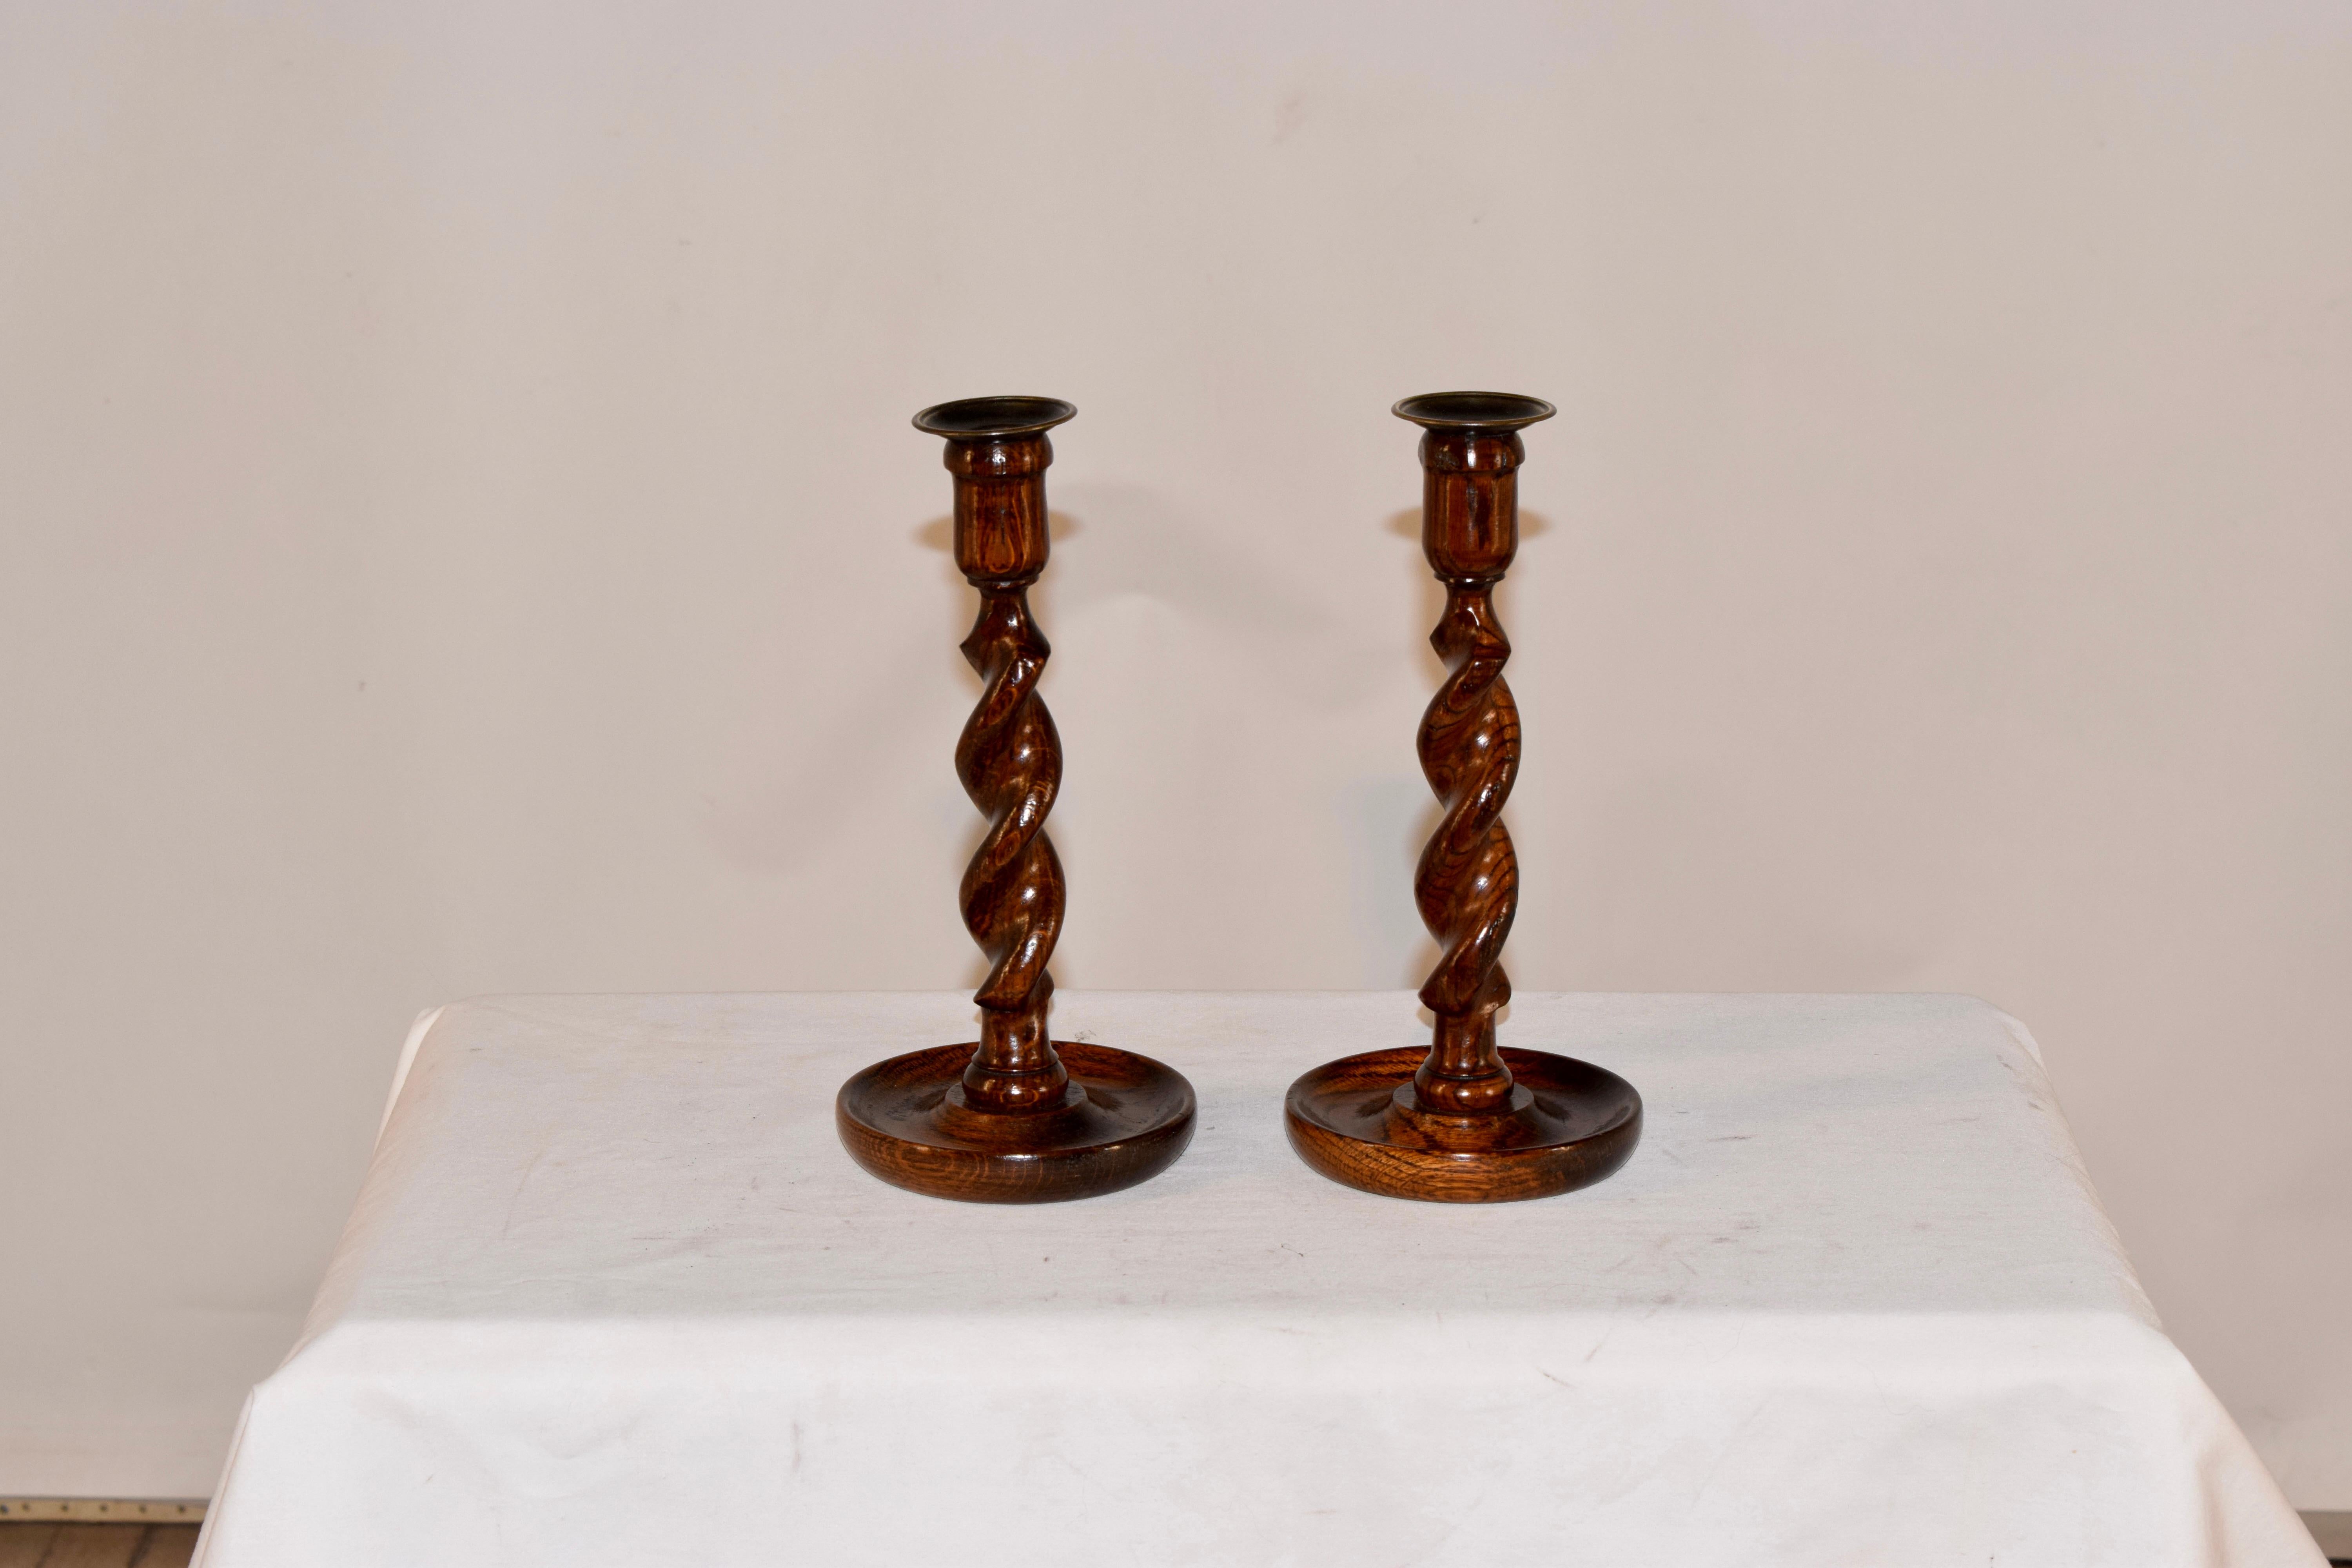 Pair of late 19th century oak candlesticks from England. The candle cups are made from hand cast brass, and are supported on a hand turned barley twist stem, resting on a turned dish shaped base.